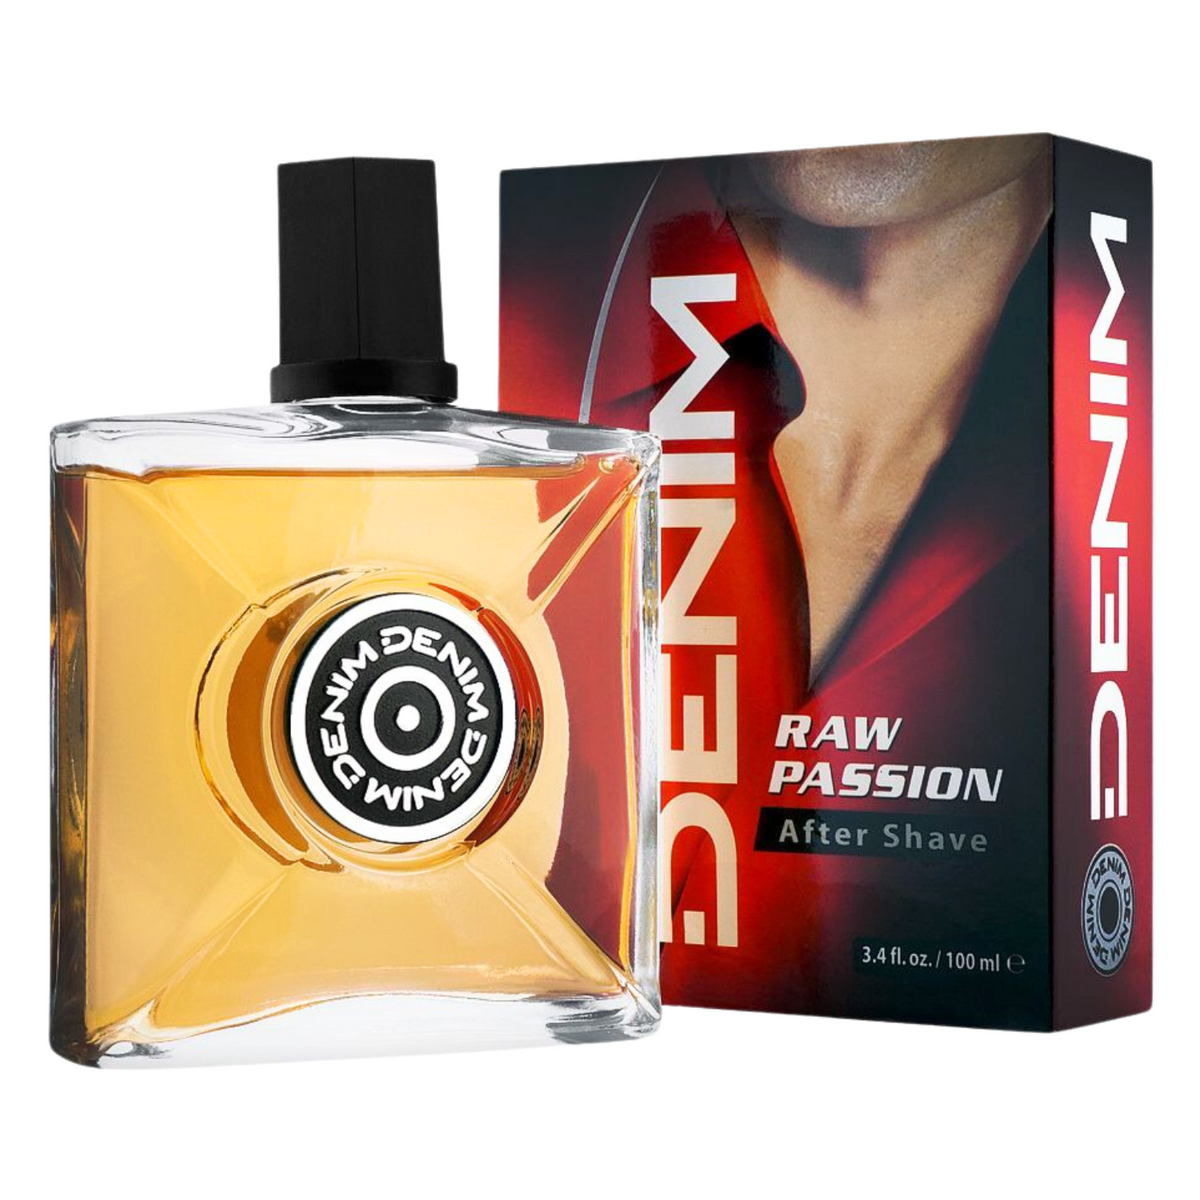 denim-raw-passion-after-shave-100ml